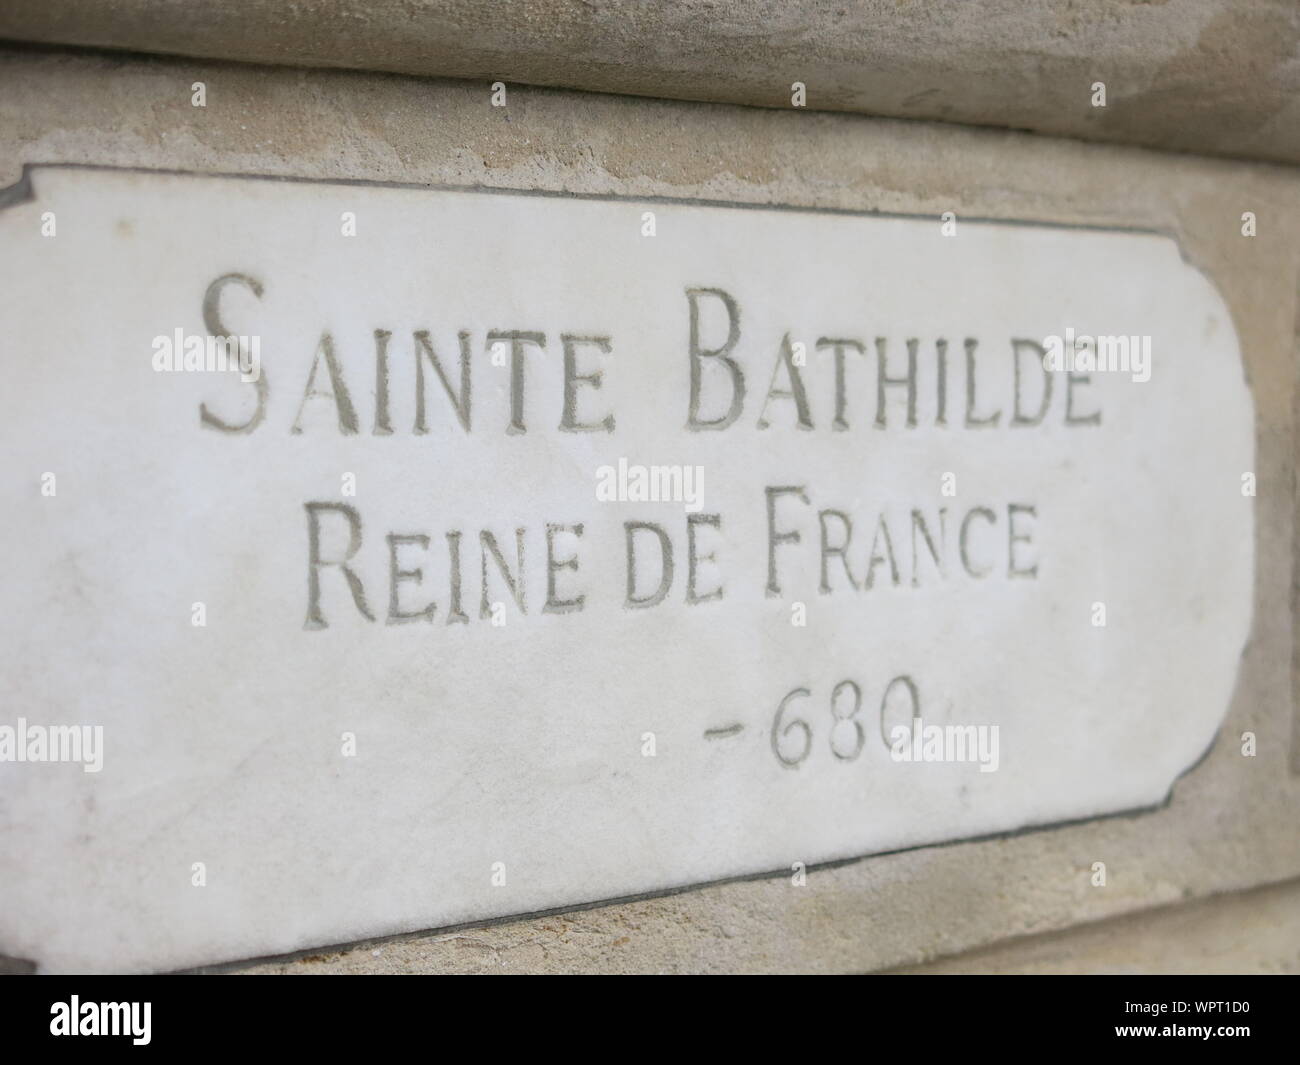 The engraving at the foot of the stone pedestal for the sculpture of 'Sainte Bathilde Reine de France', a 7th century Queen in French history. Stock Photo